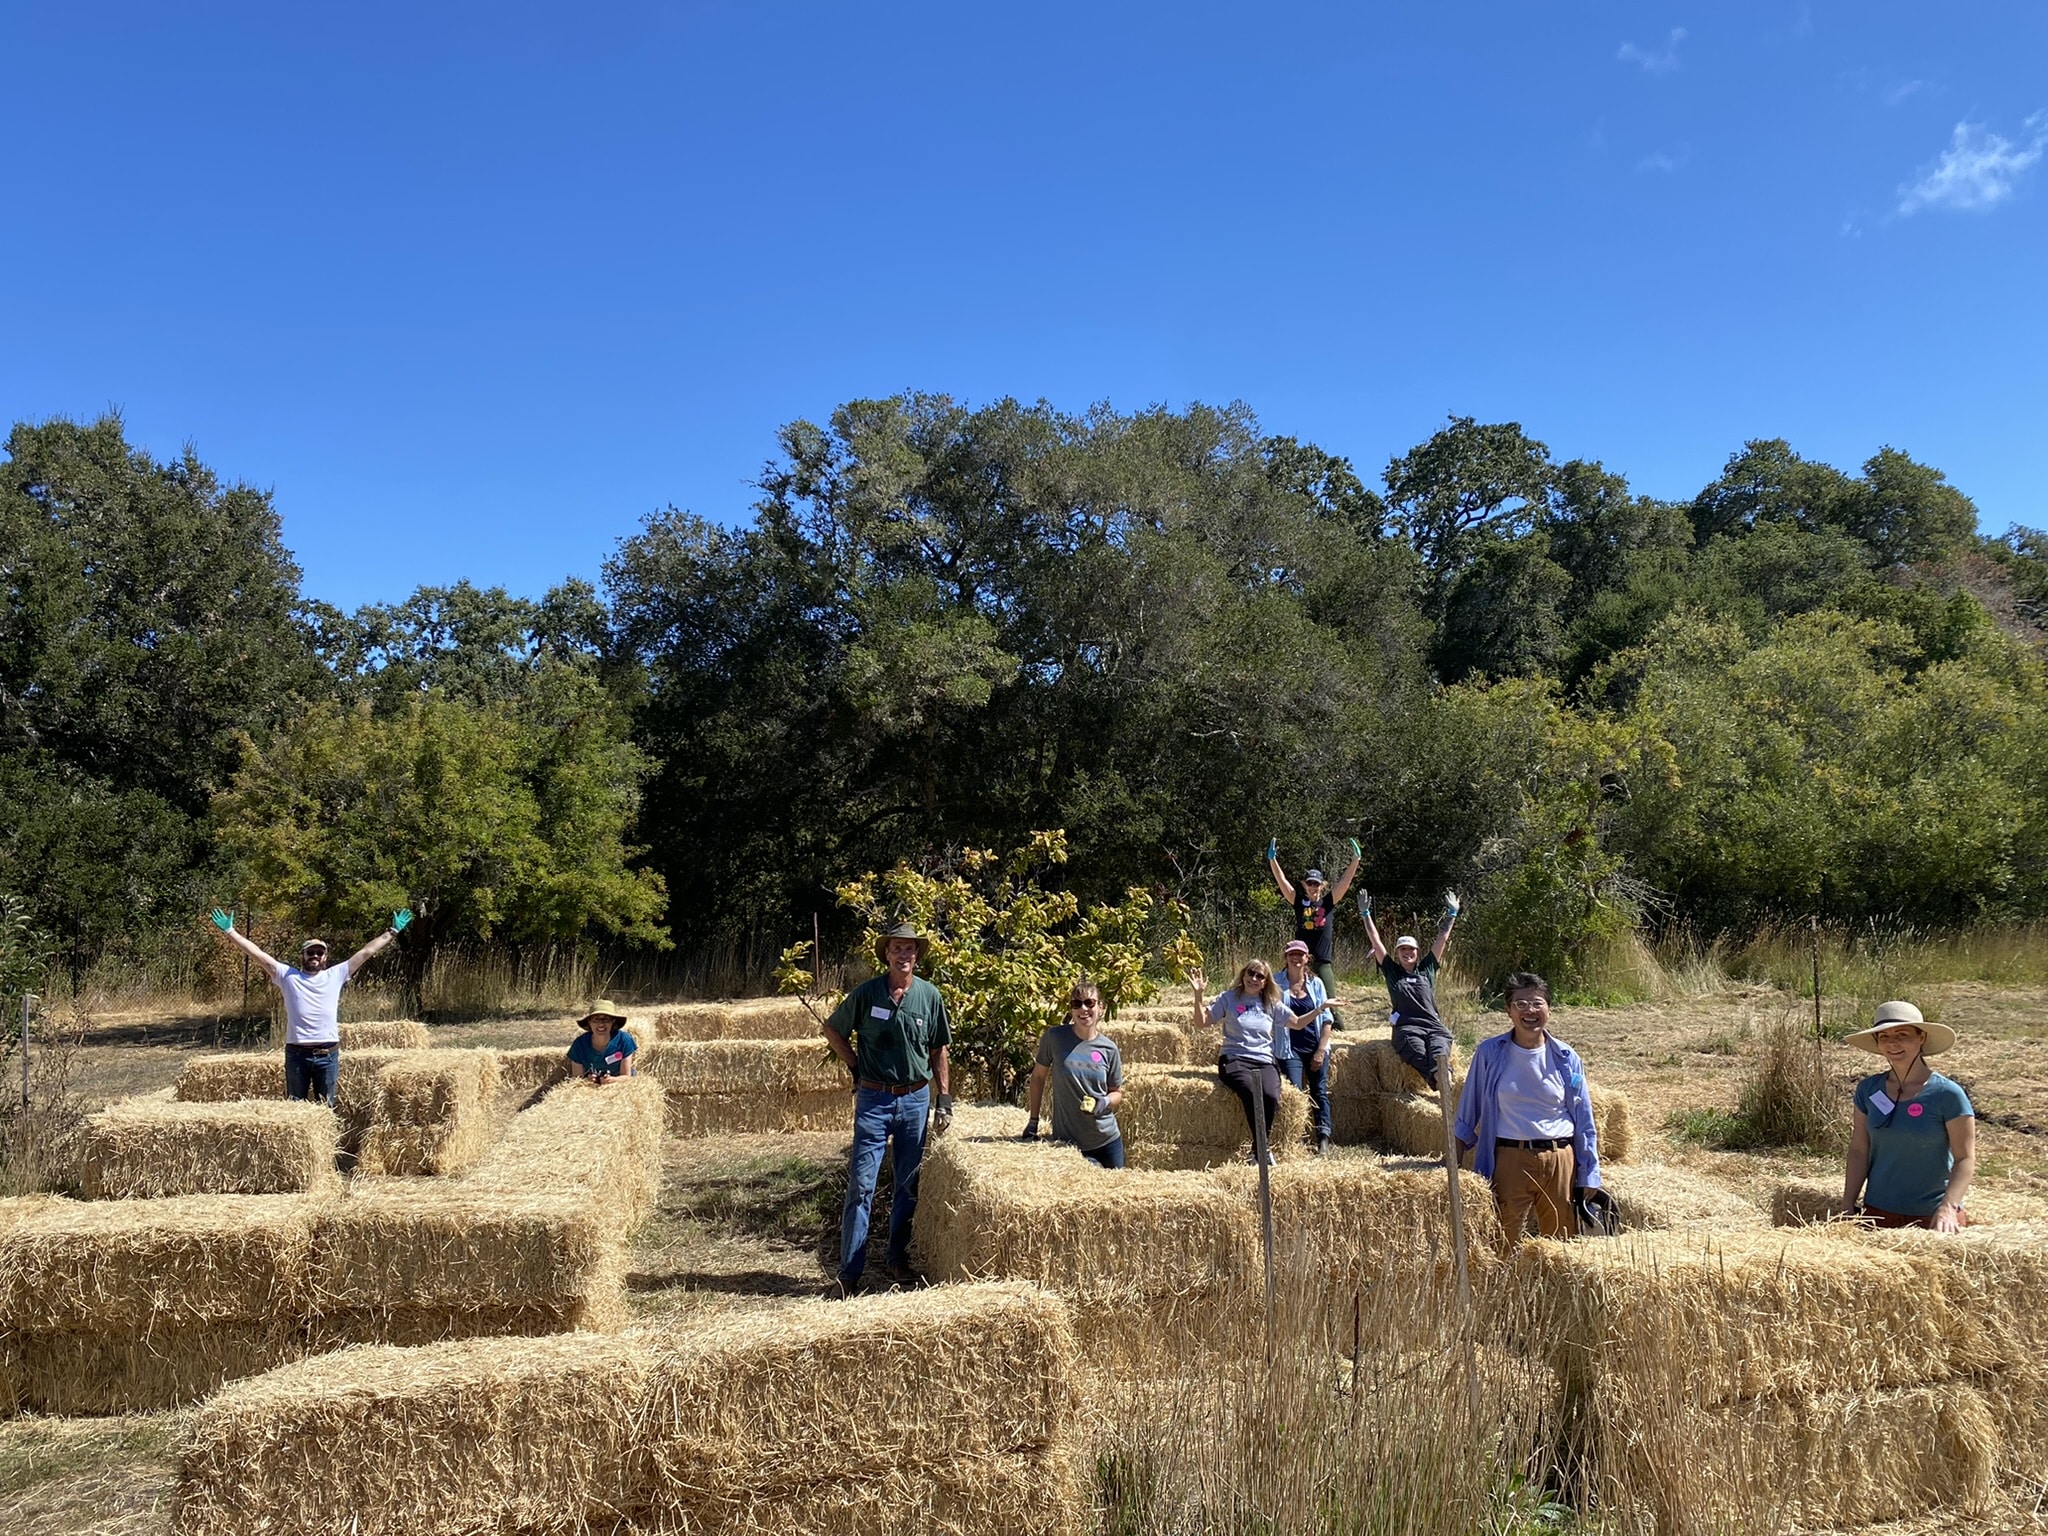 Orchard Care, Service Learning, September 2022.
Staff member Kathy King leads a group of participants in building the hay maze for Orchard Days.